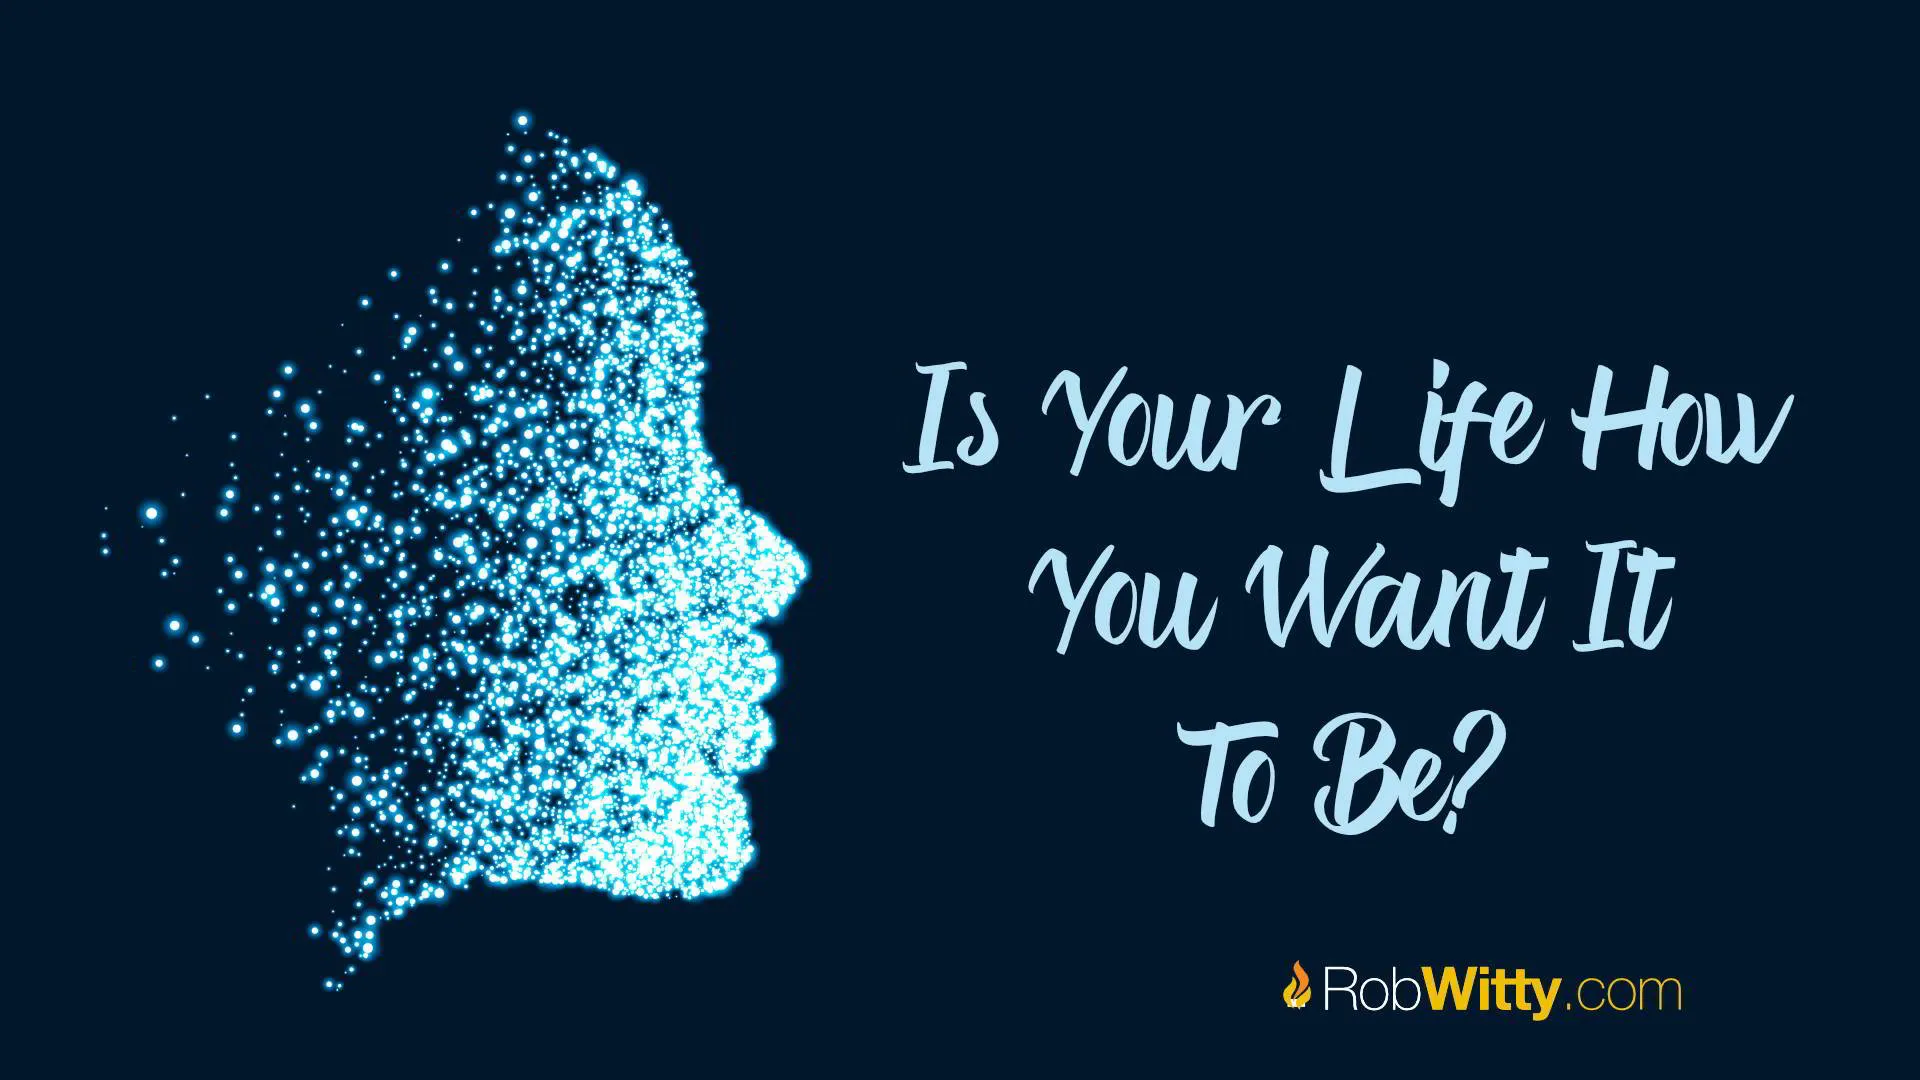 Is Your Life How You Want It To Be?